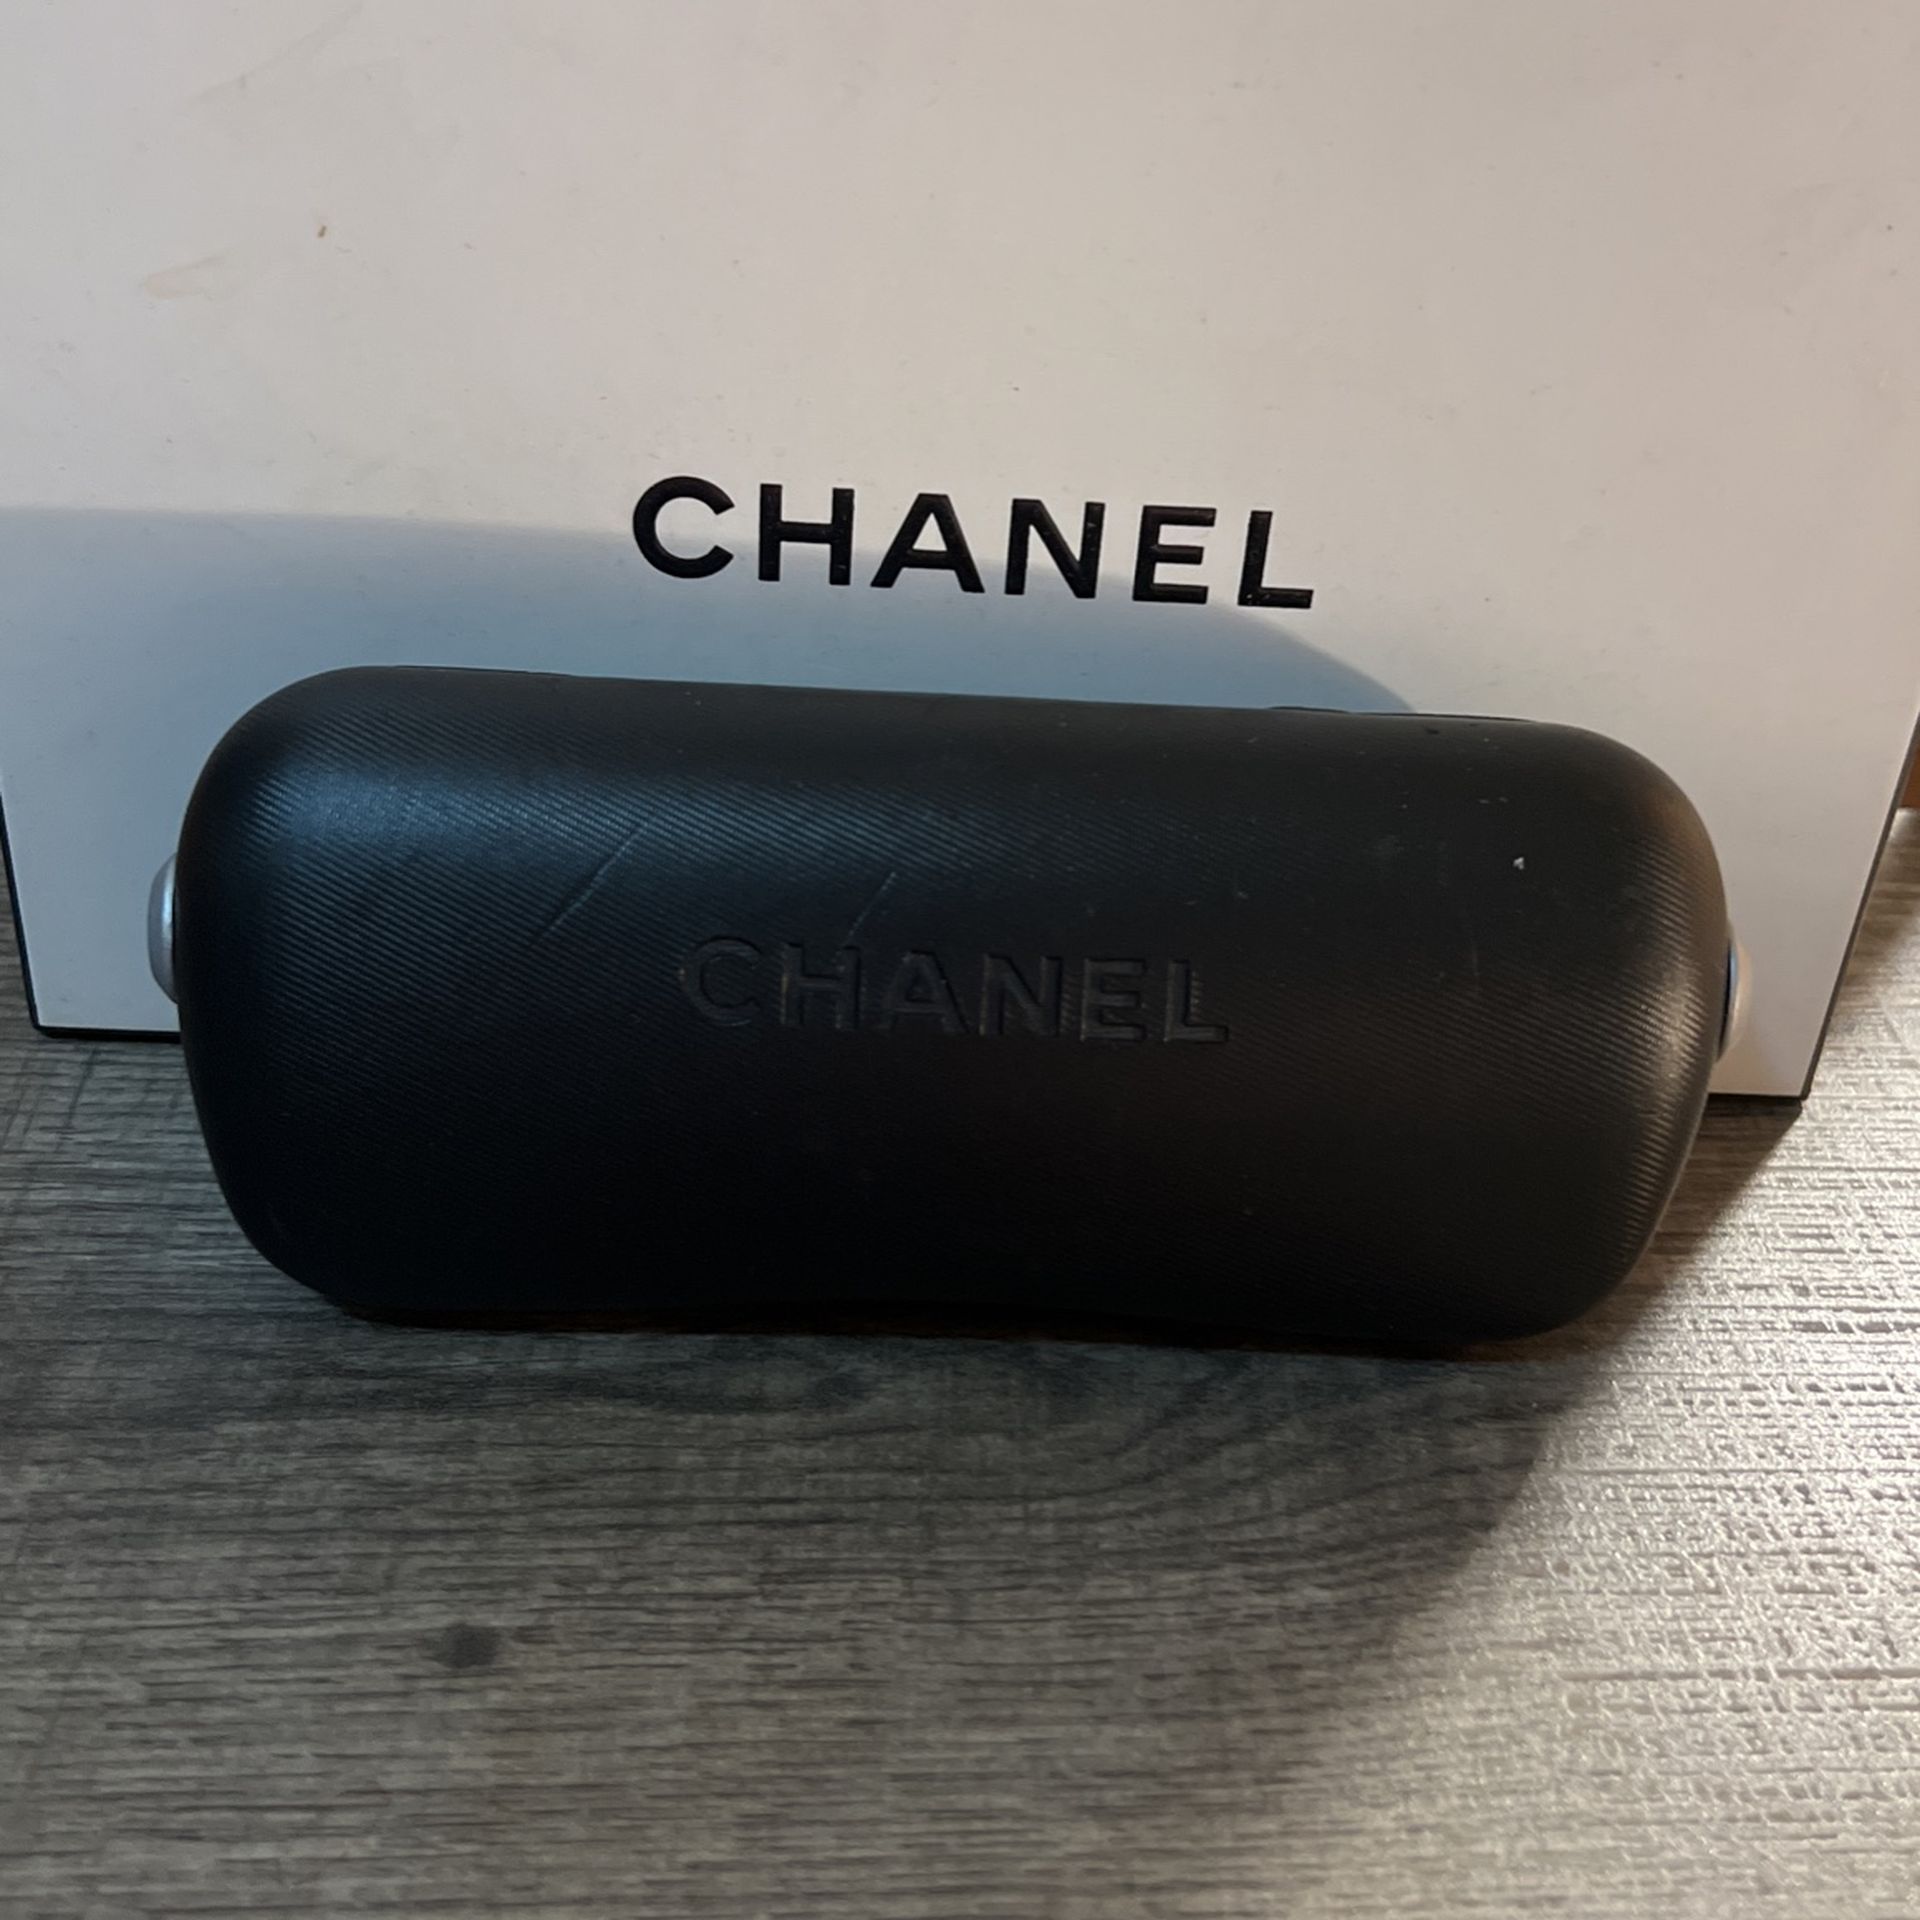 Chanel Authentic Leather Sunglass Case $25 Excellent Like New Ccmy Page 100 Of Items Ty